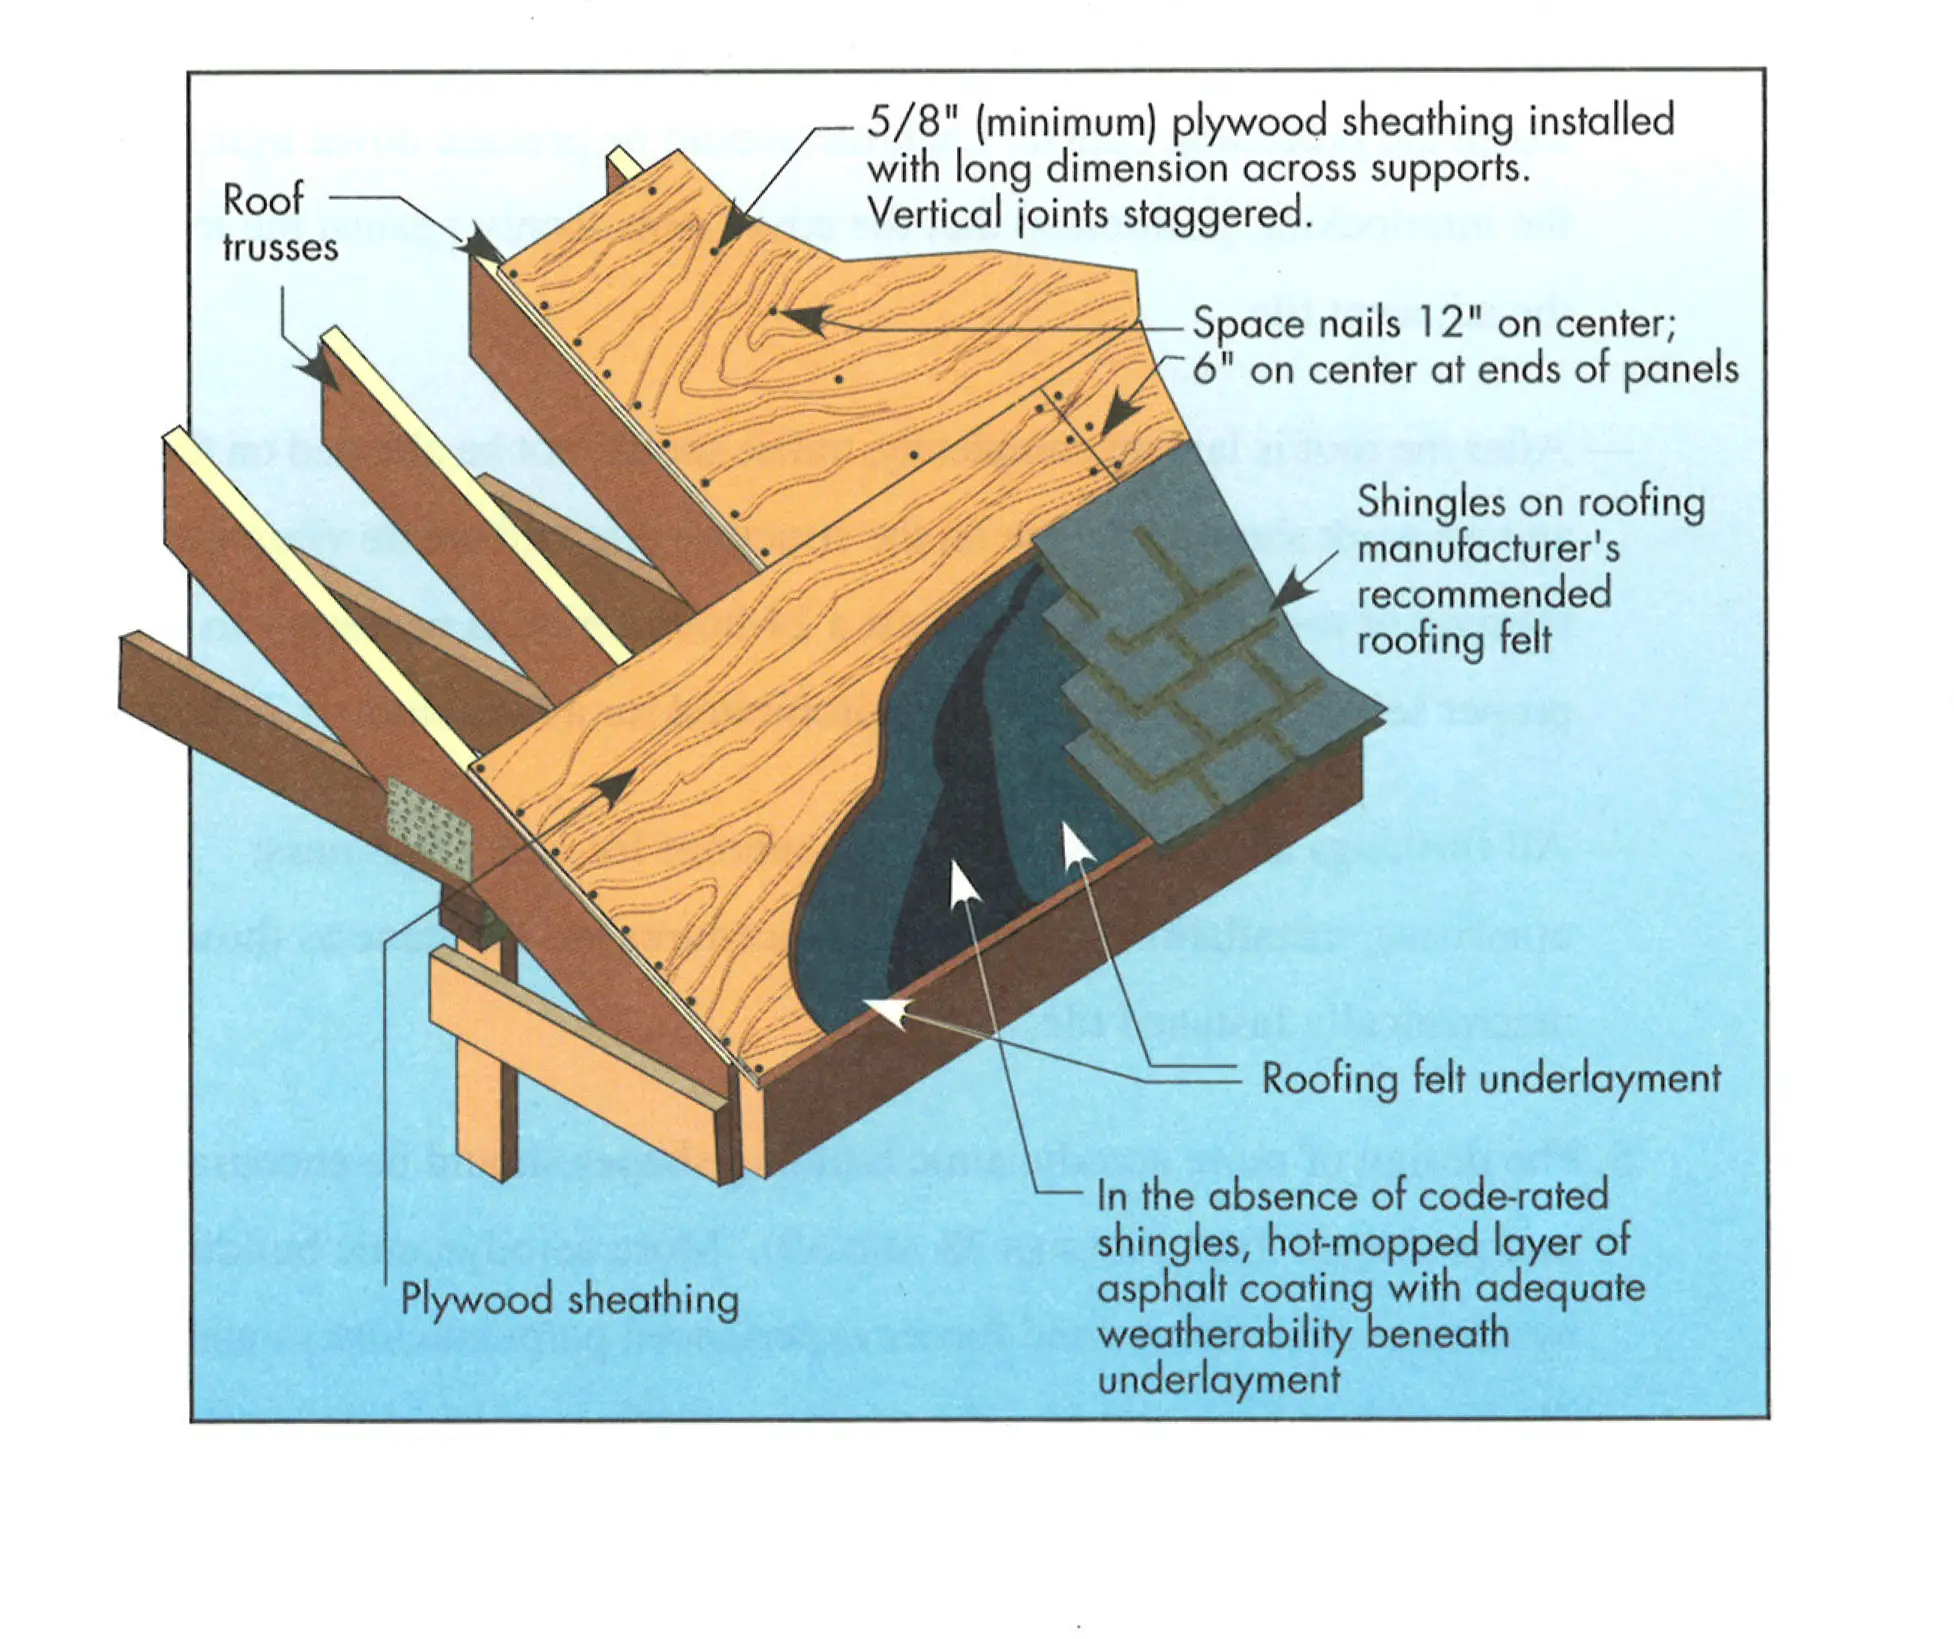 Composition shingle roofing system showing sheathing and hot